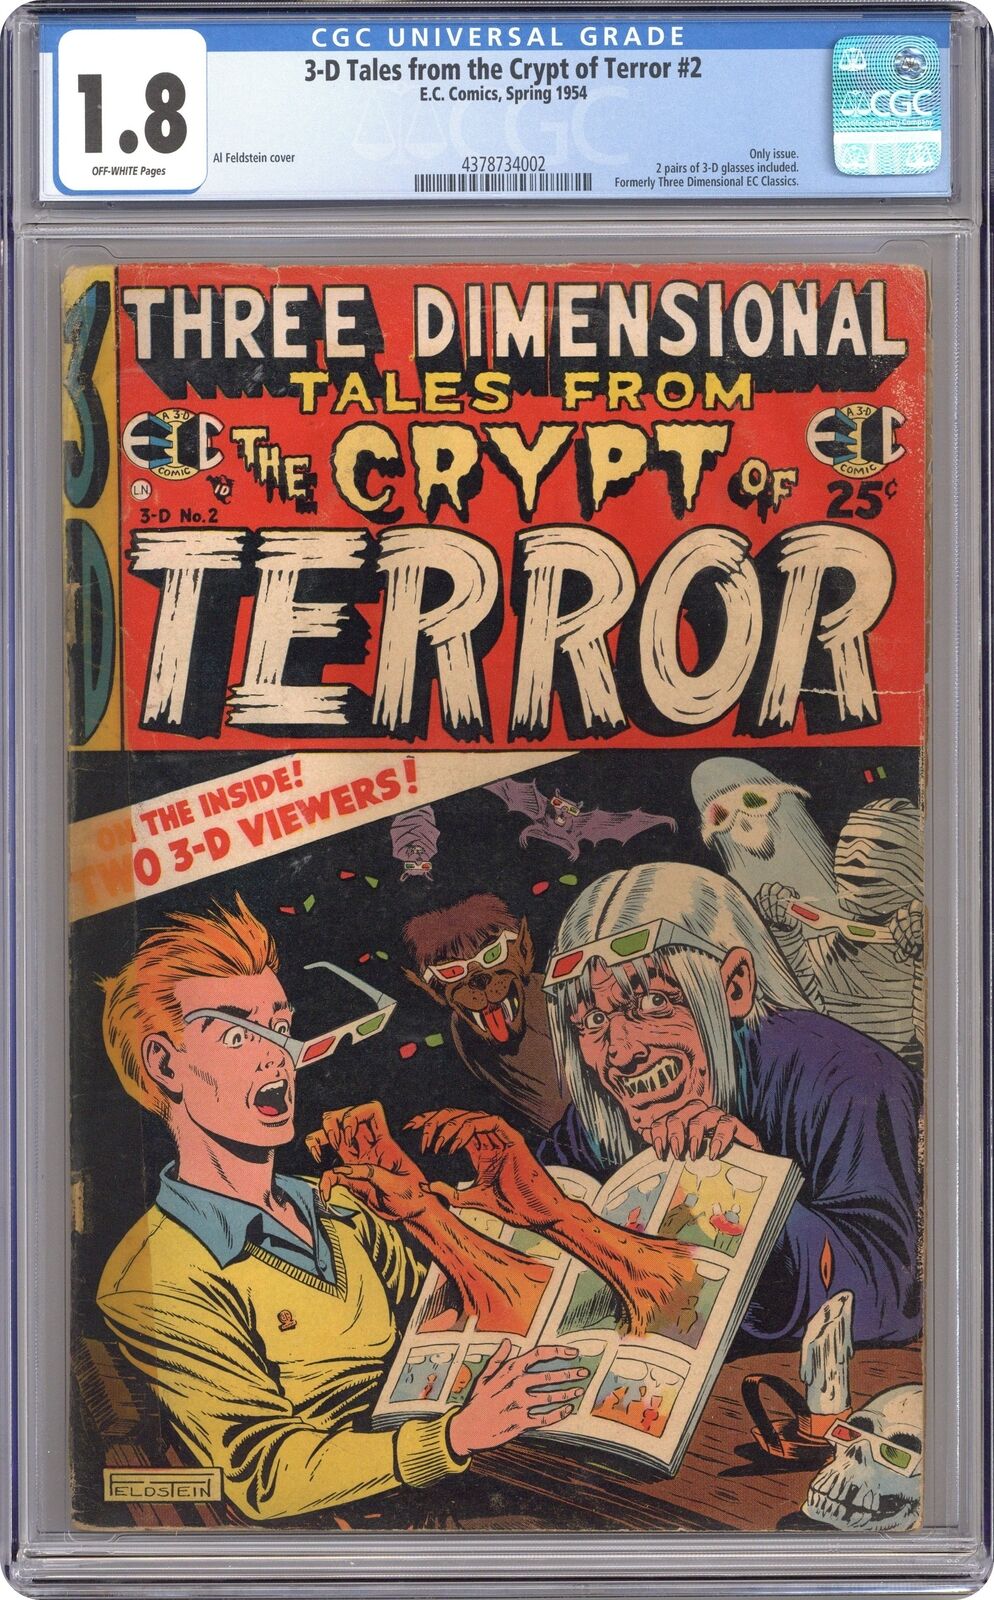 Three Dimensional Tales from the Crypt #2 CGC 1.8 1954 4378734002